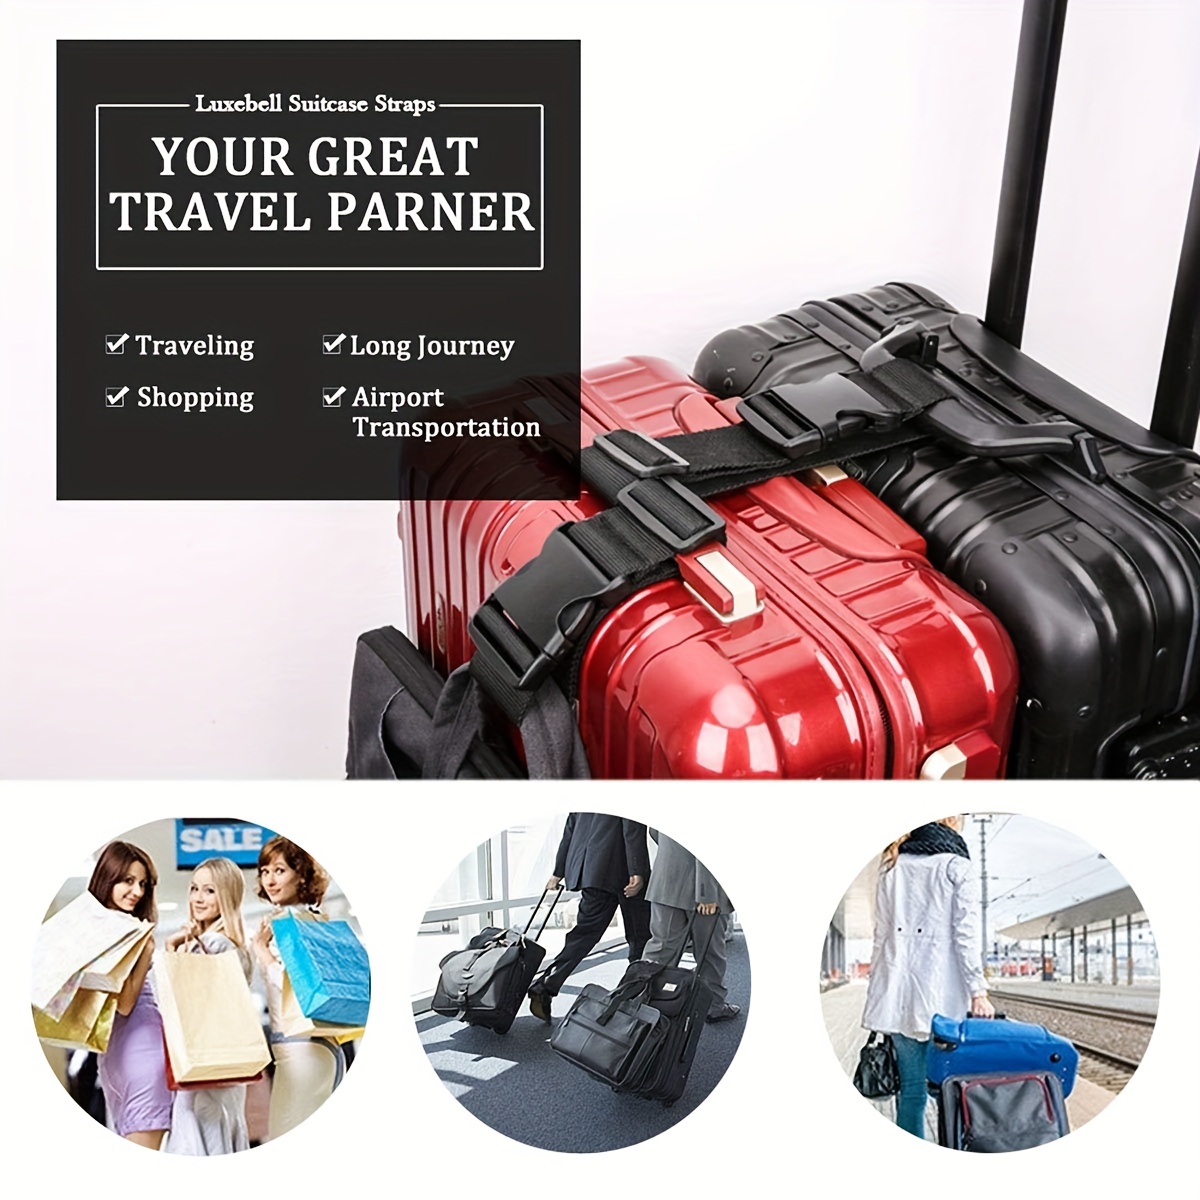 2 Pieces Luggage Straps for Suitcases Adjustable Luggage Belt Travel  Suitcase Belt Luggage Suitcase Straps with Buckles Add a Bag Luggage Strap  for